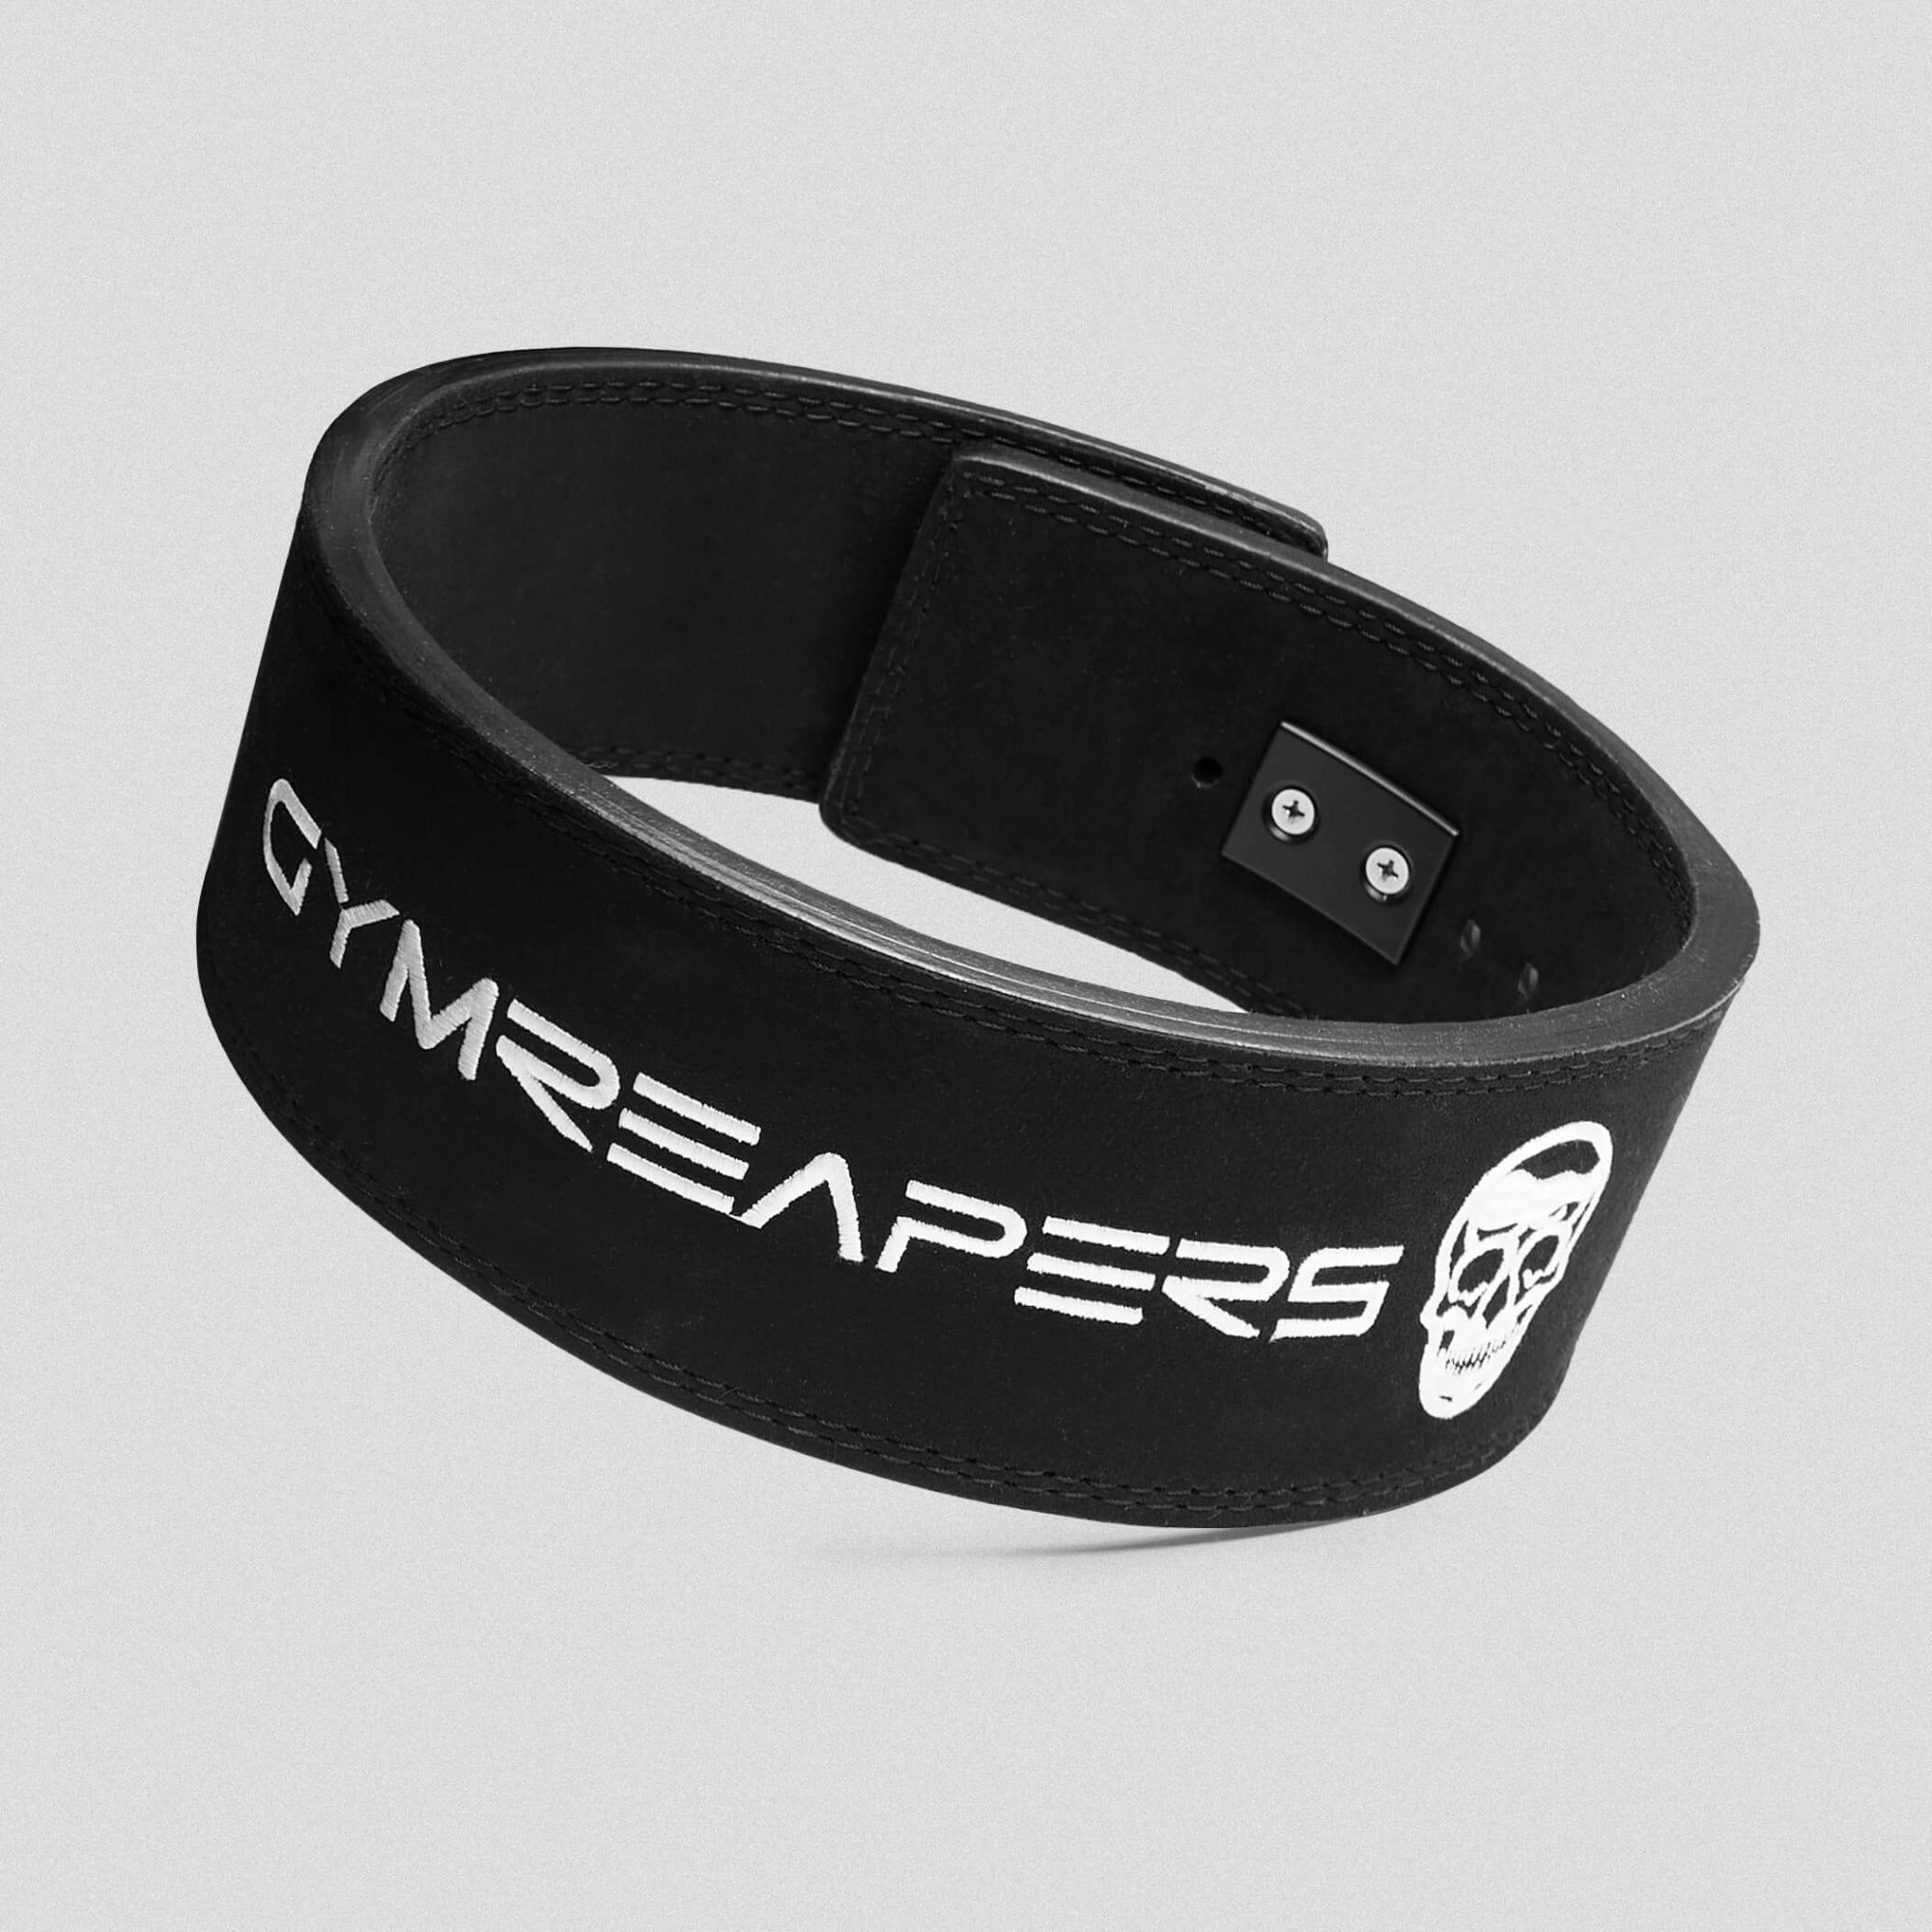 Gymreapers Ankle Straps - Black (Pair)